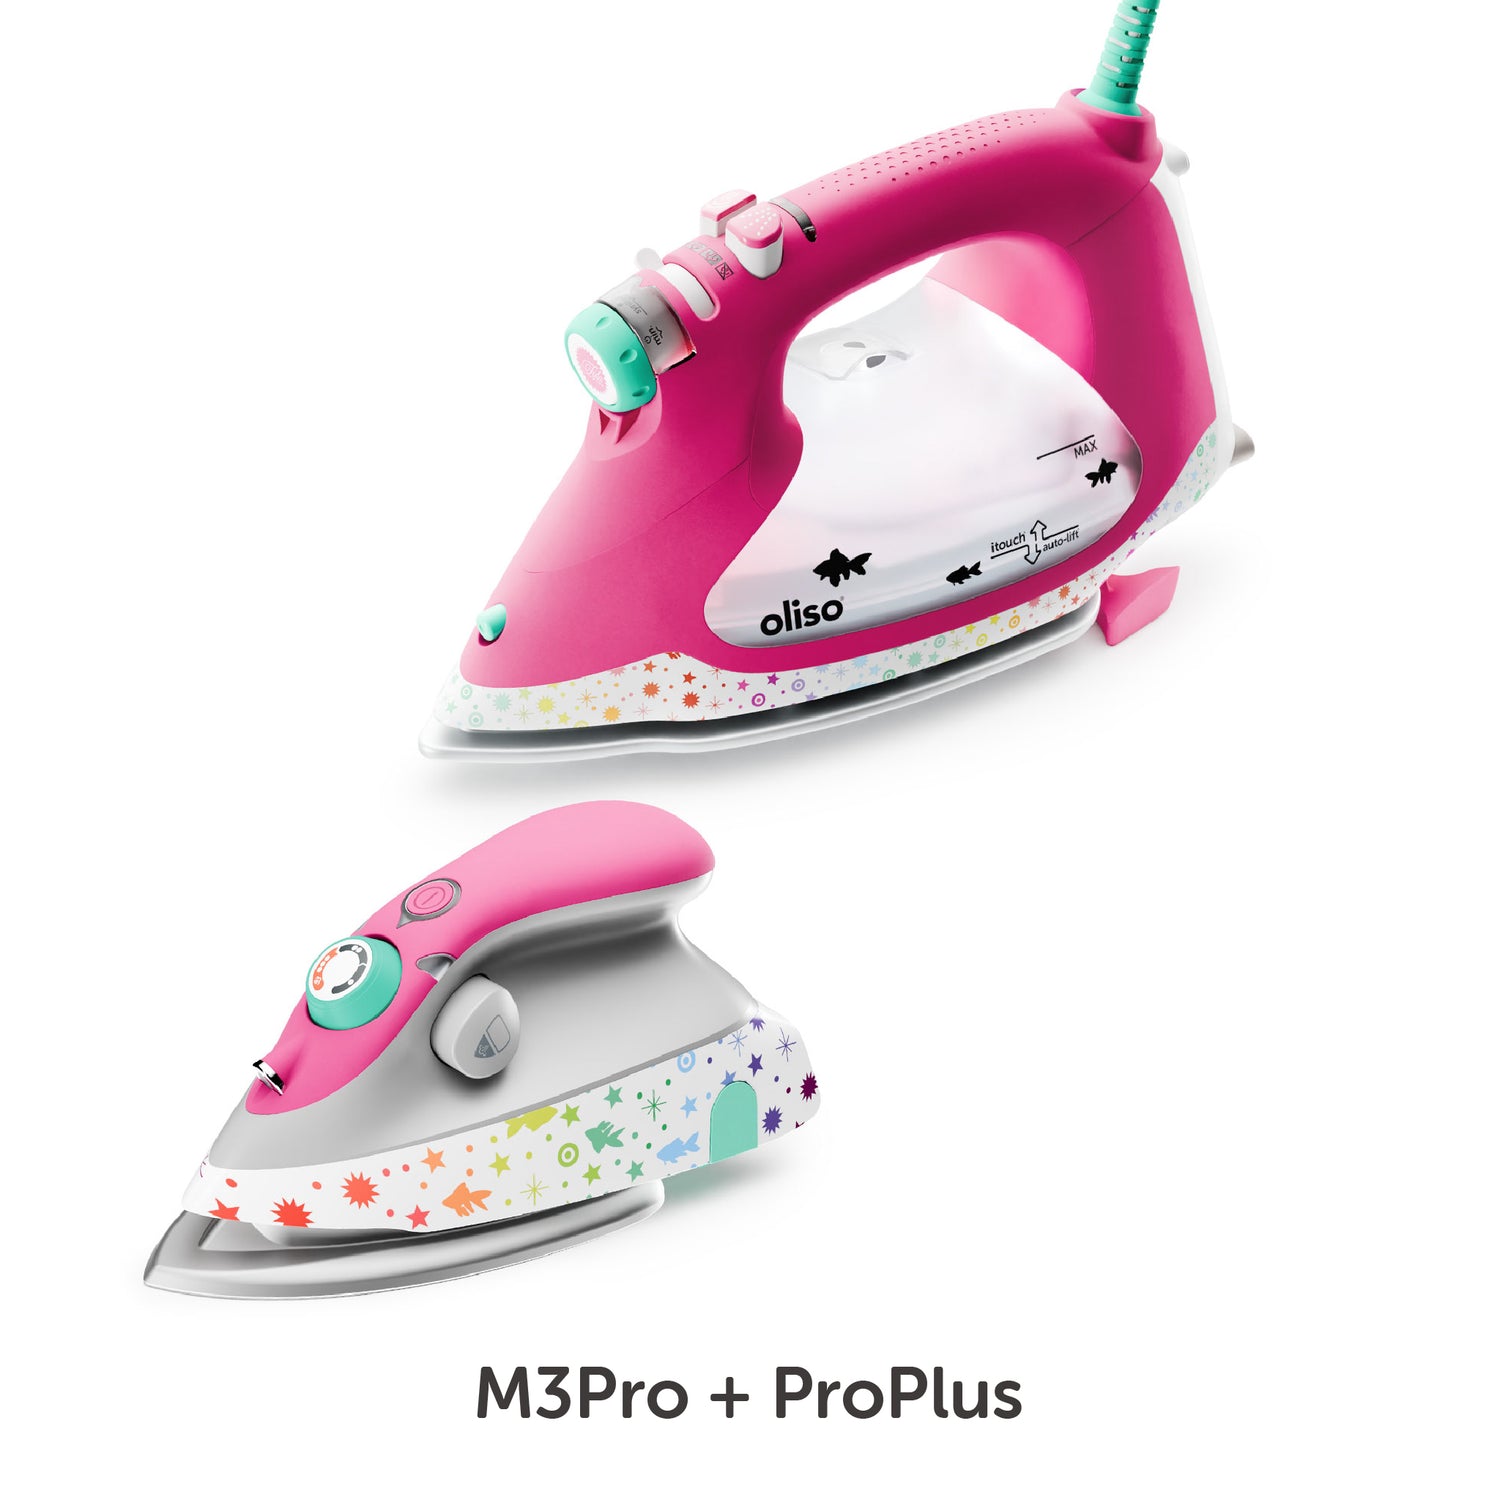 The Tula Pink M3Pro and TG1600+ smart iron side by side.